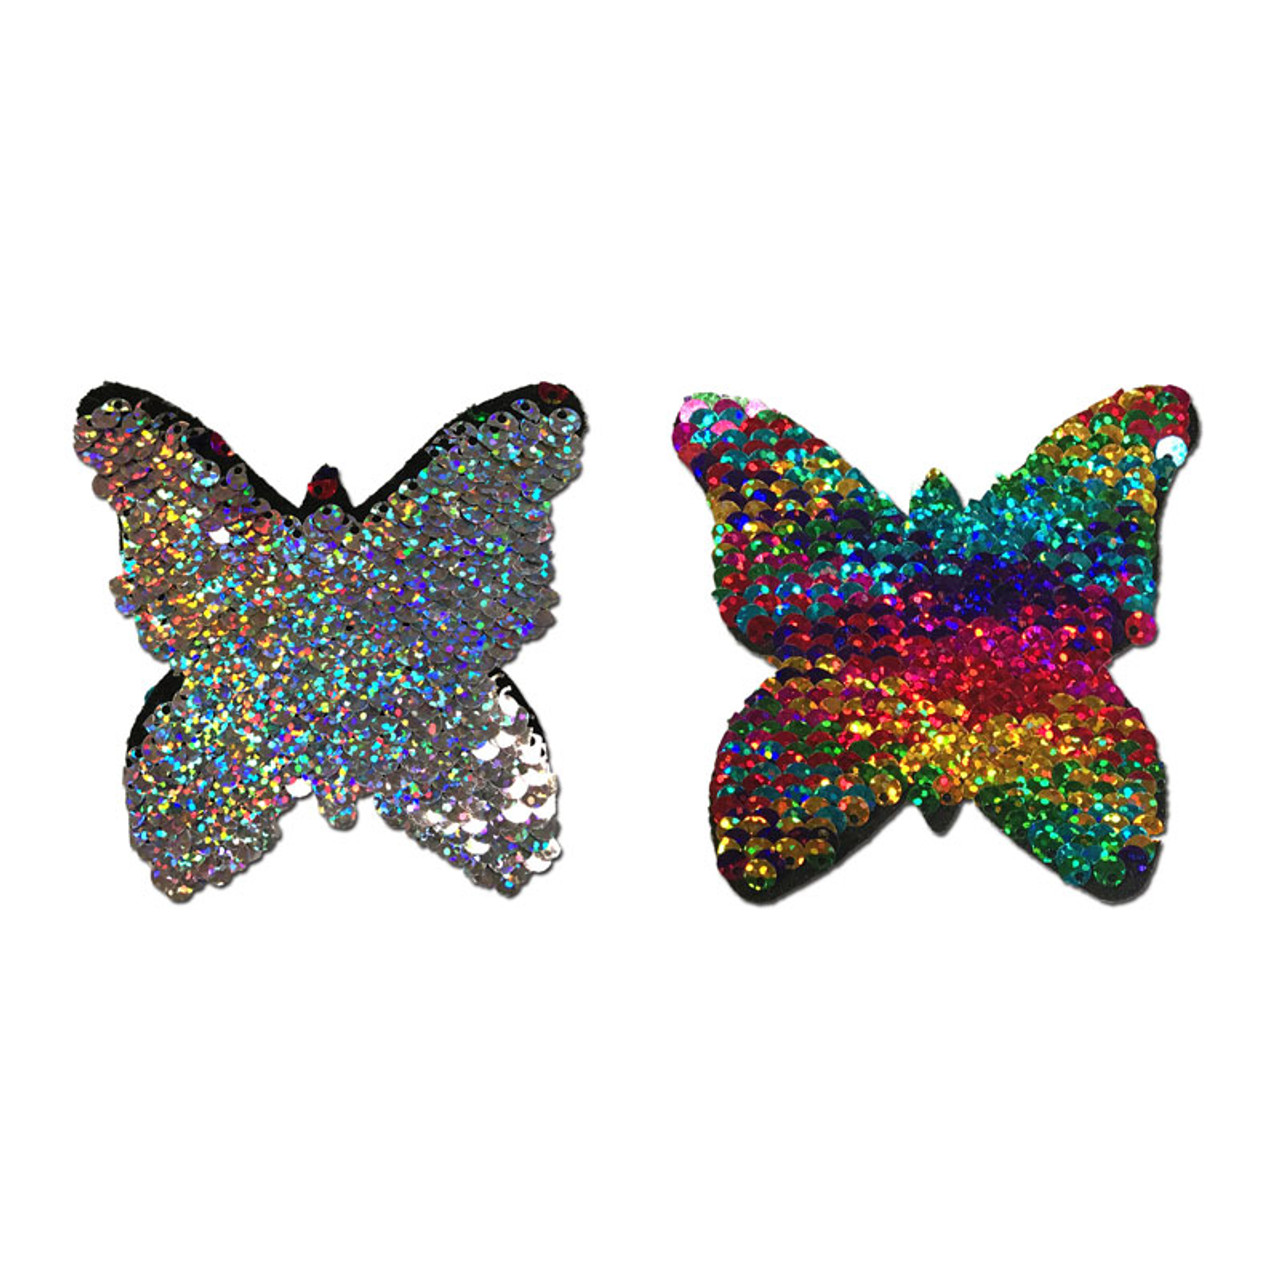 https://cdn11.bigcommerce.com/s-rph88/images/stencil/1280x1280/products/21116/162510/pastease-rainbow-silver-color-flip-glitter-sequined-butterfly-nipple-pasties_3__87548.1517866825.jpg?c=2